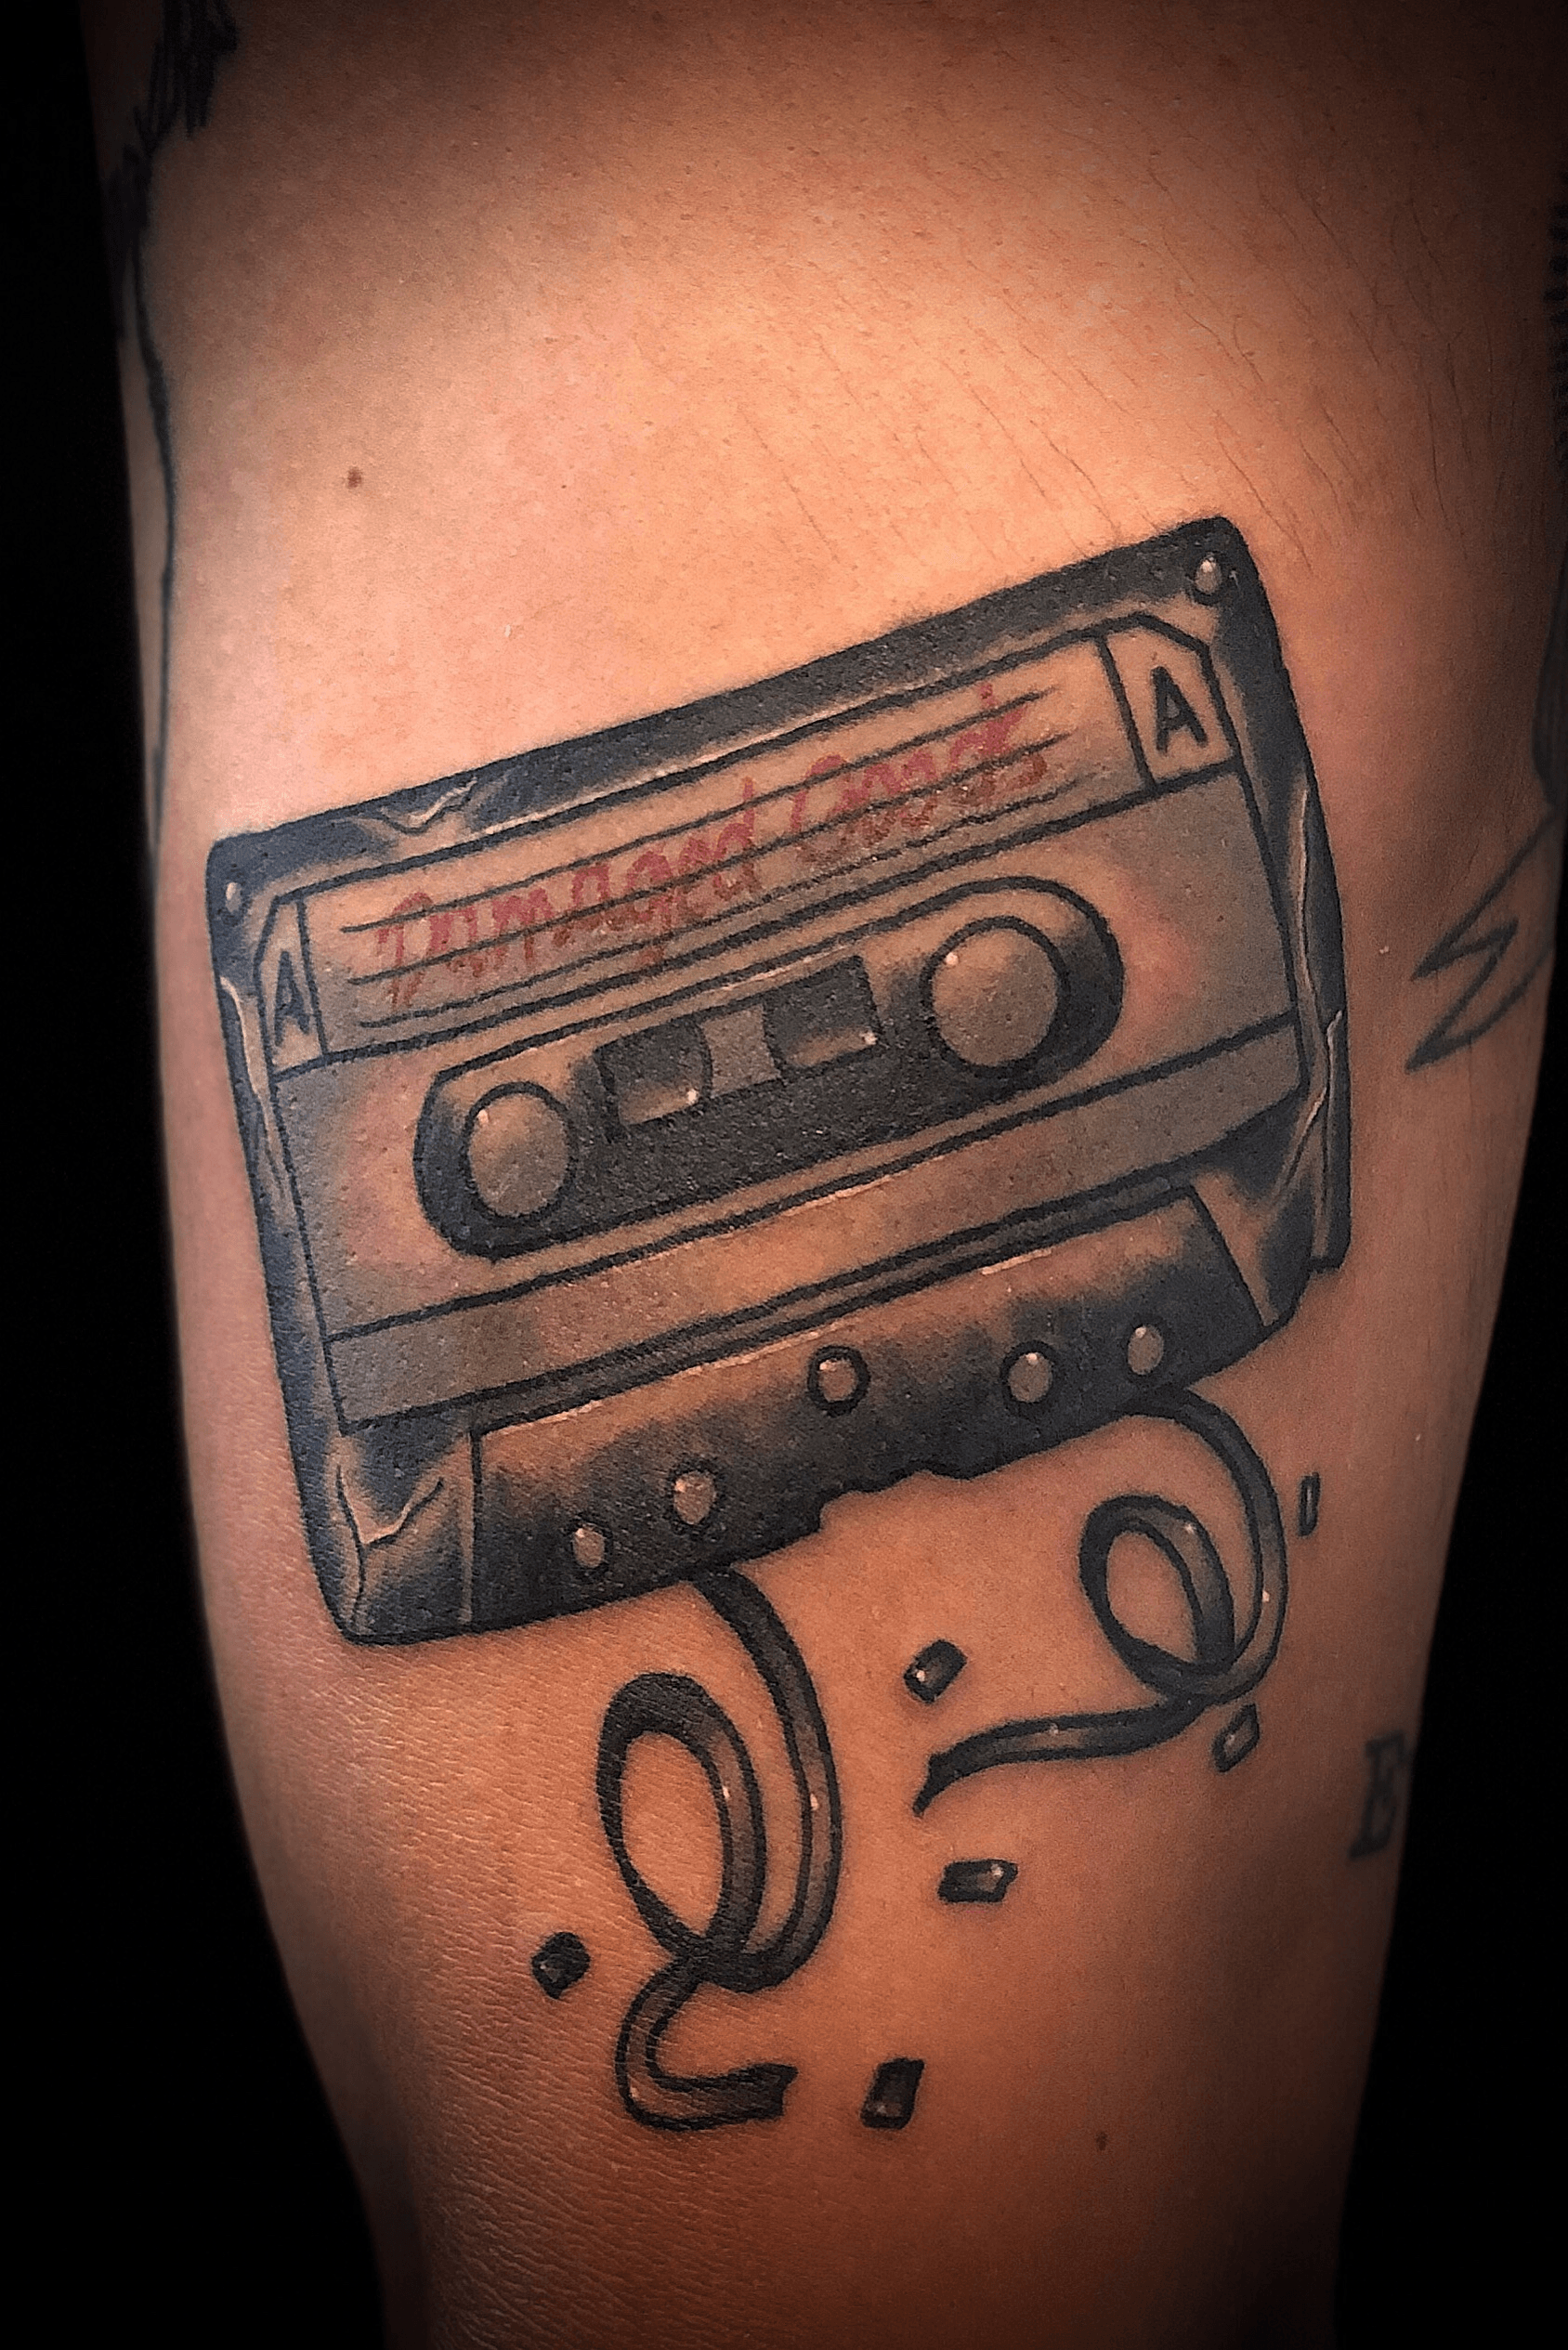 Tattoo Snob on Instagram Cassette Tape tattoo by nicholastattoos at  theartisantattoo in Liverpool NY nicholastattoos nicktoscano  theartisantattoo